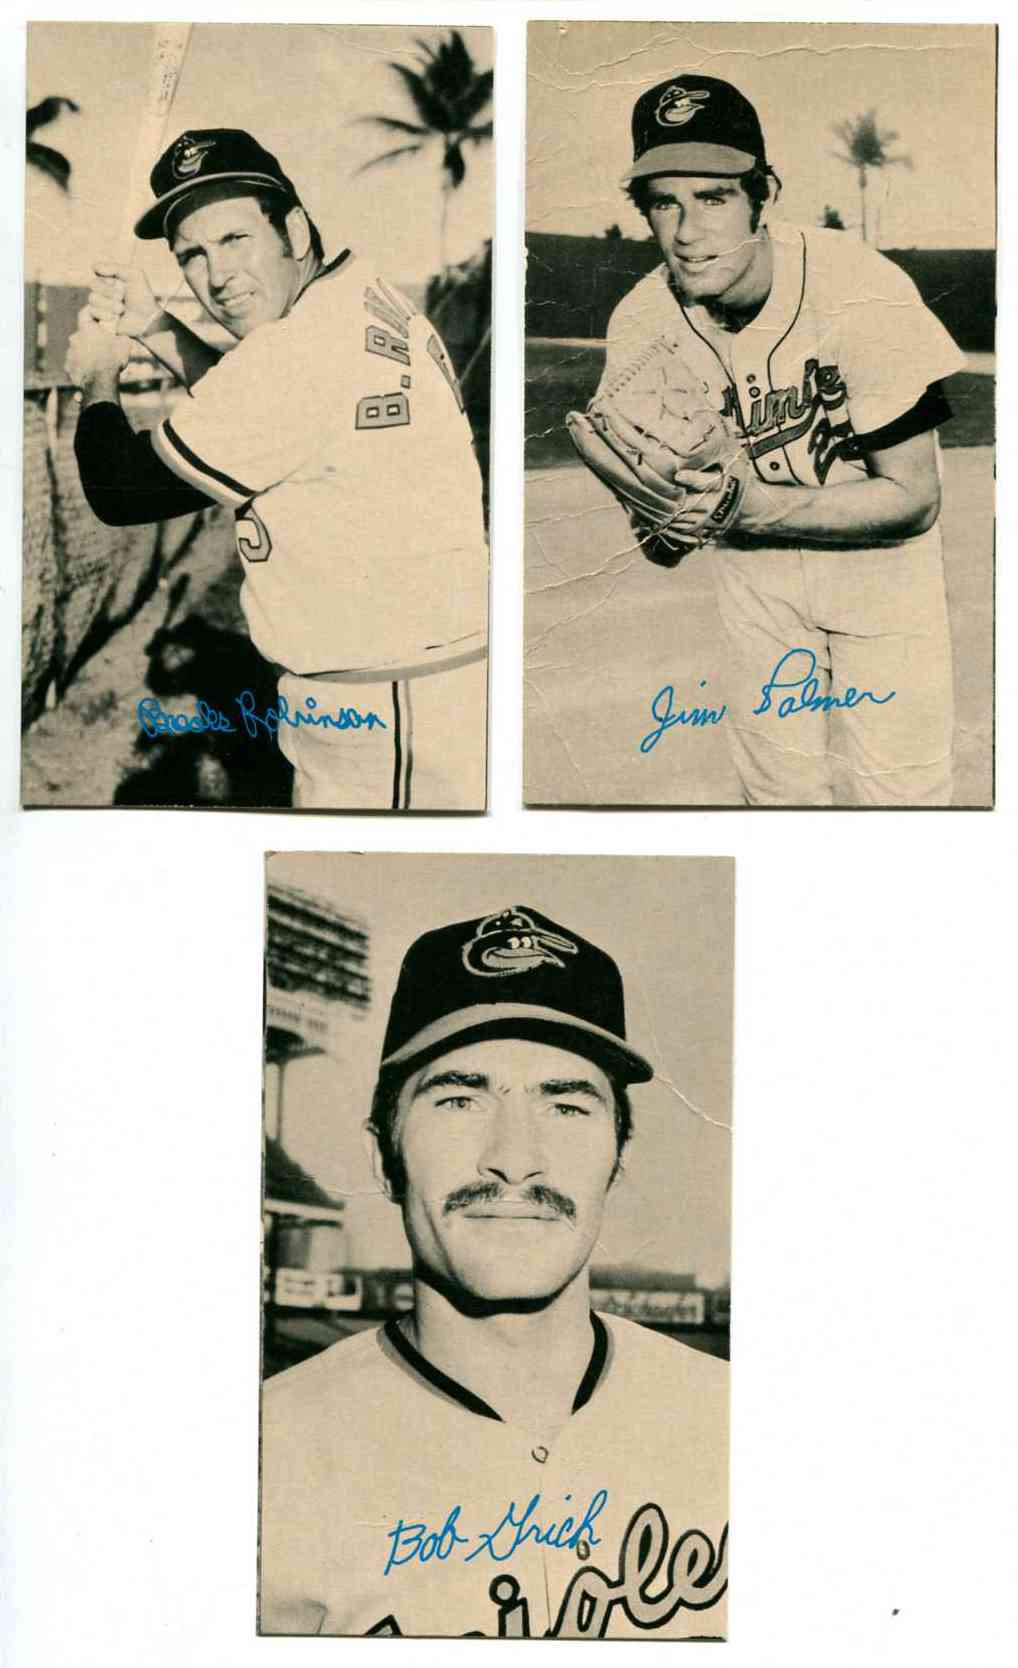  Orioles Team Set - 1974 Topps Deckle Edge PROOFS [WB] (3 cards) w/JIM PALM Baseball cards value